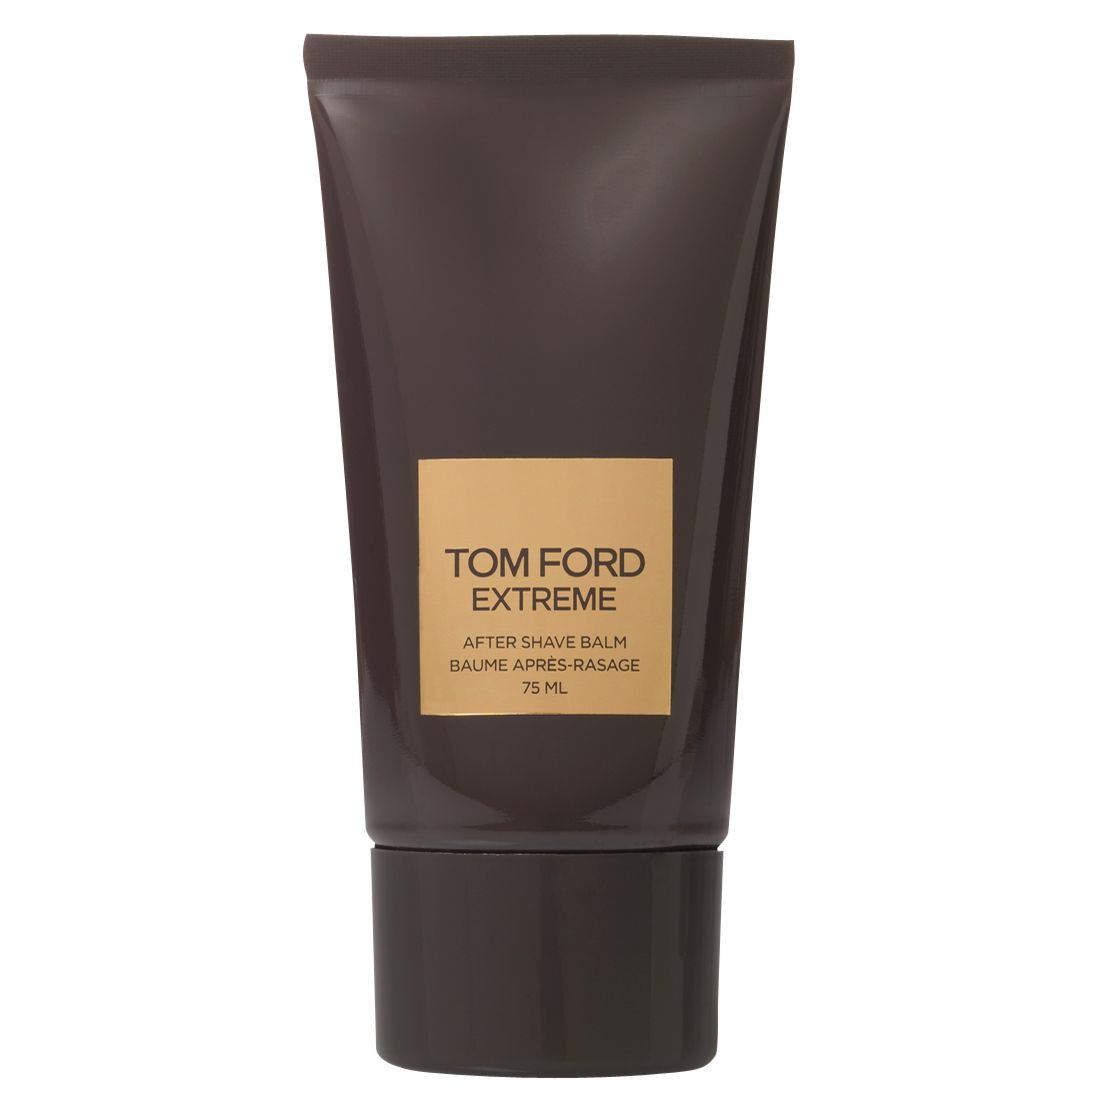 TOM FORD Extreme Aftershave Balm, 75ml